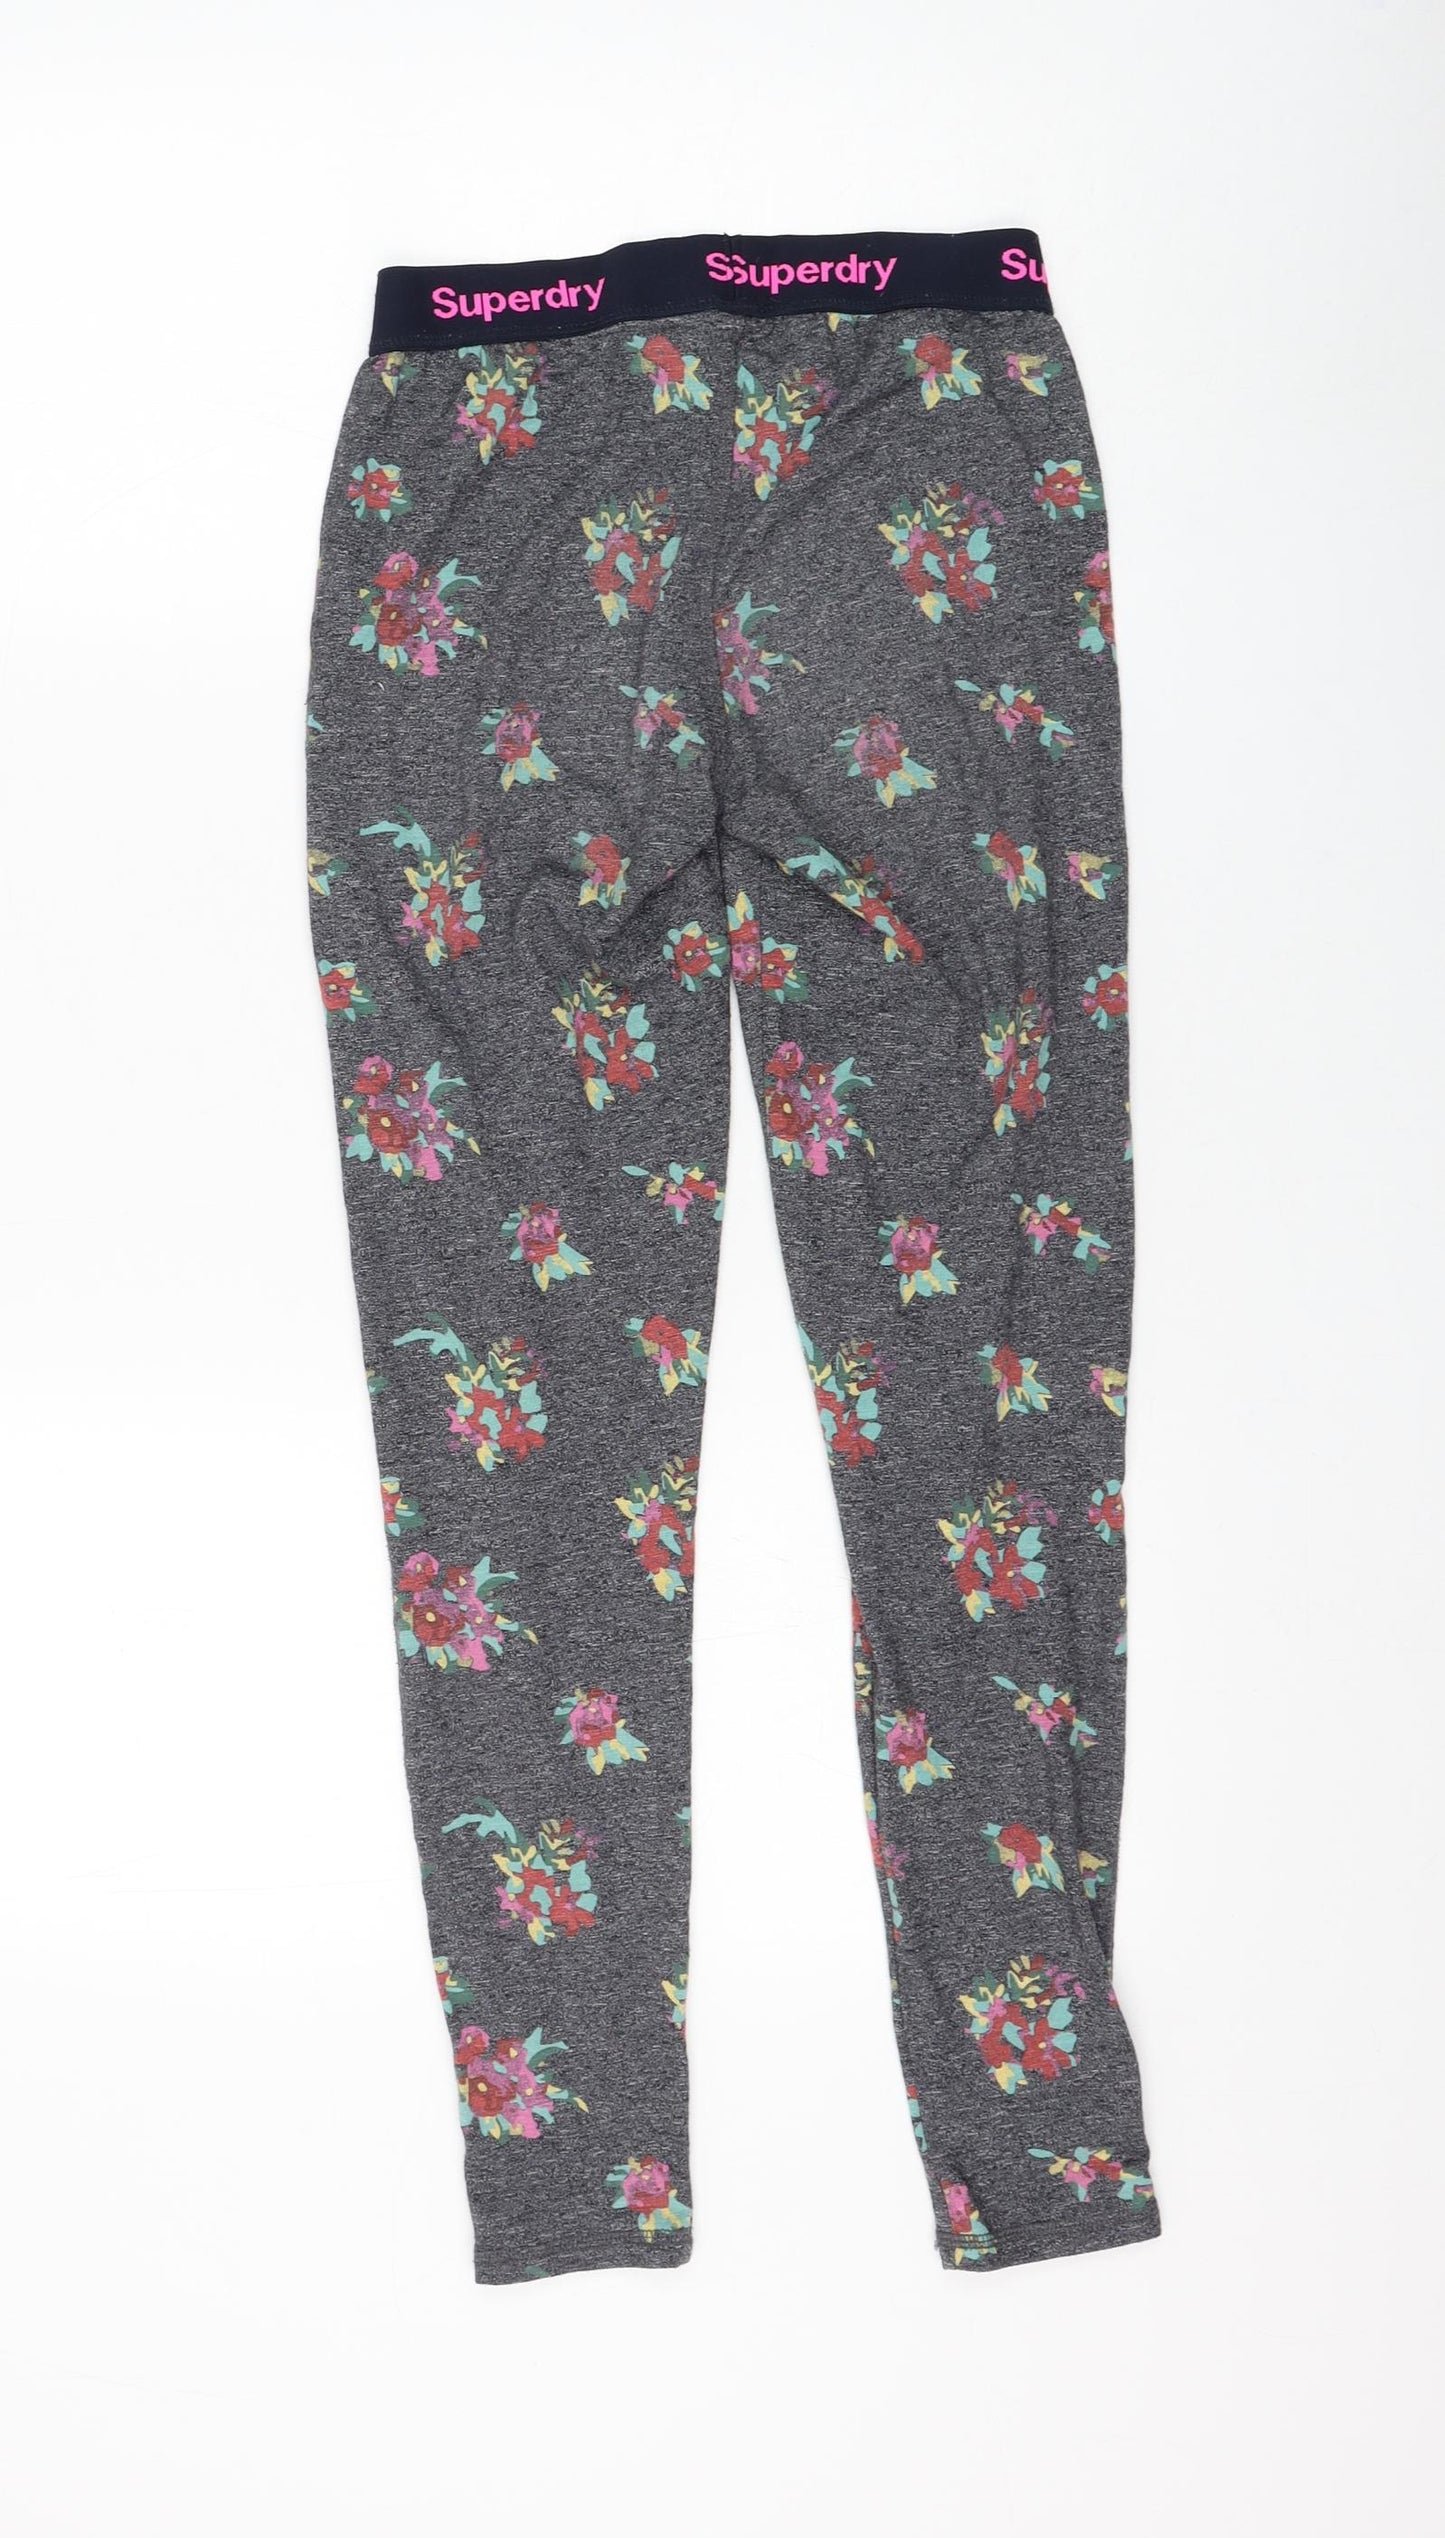 Superdry Womens Grey Floral Cotton Jogger Leggings Size XS L27 in